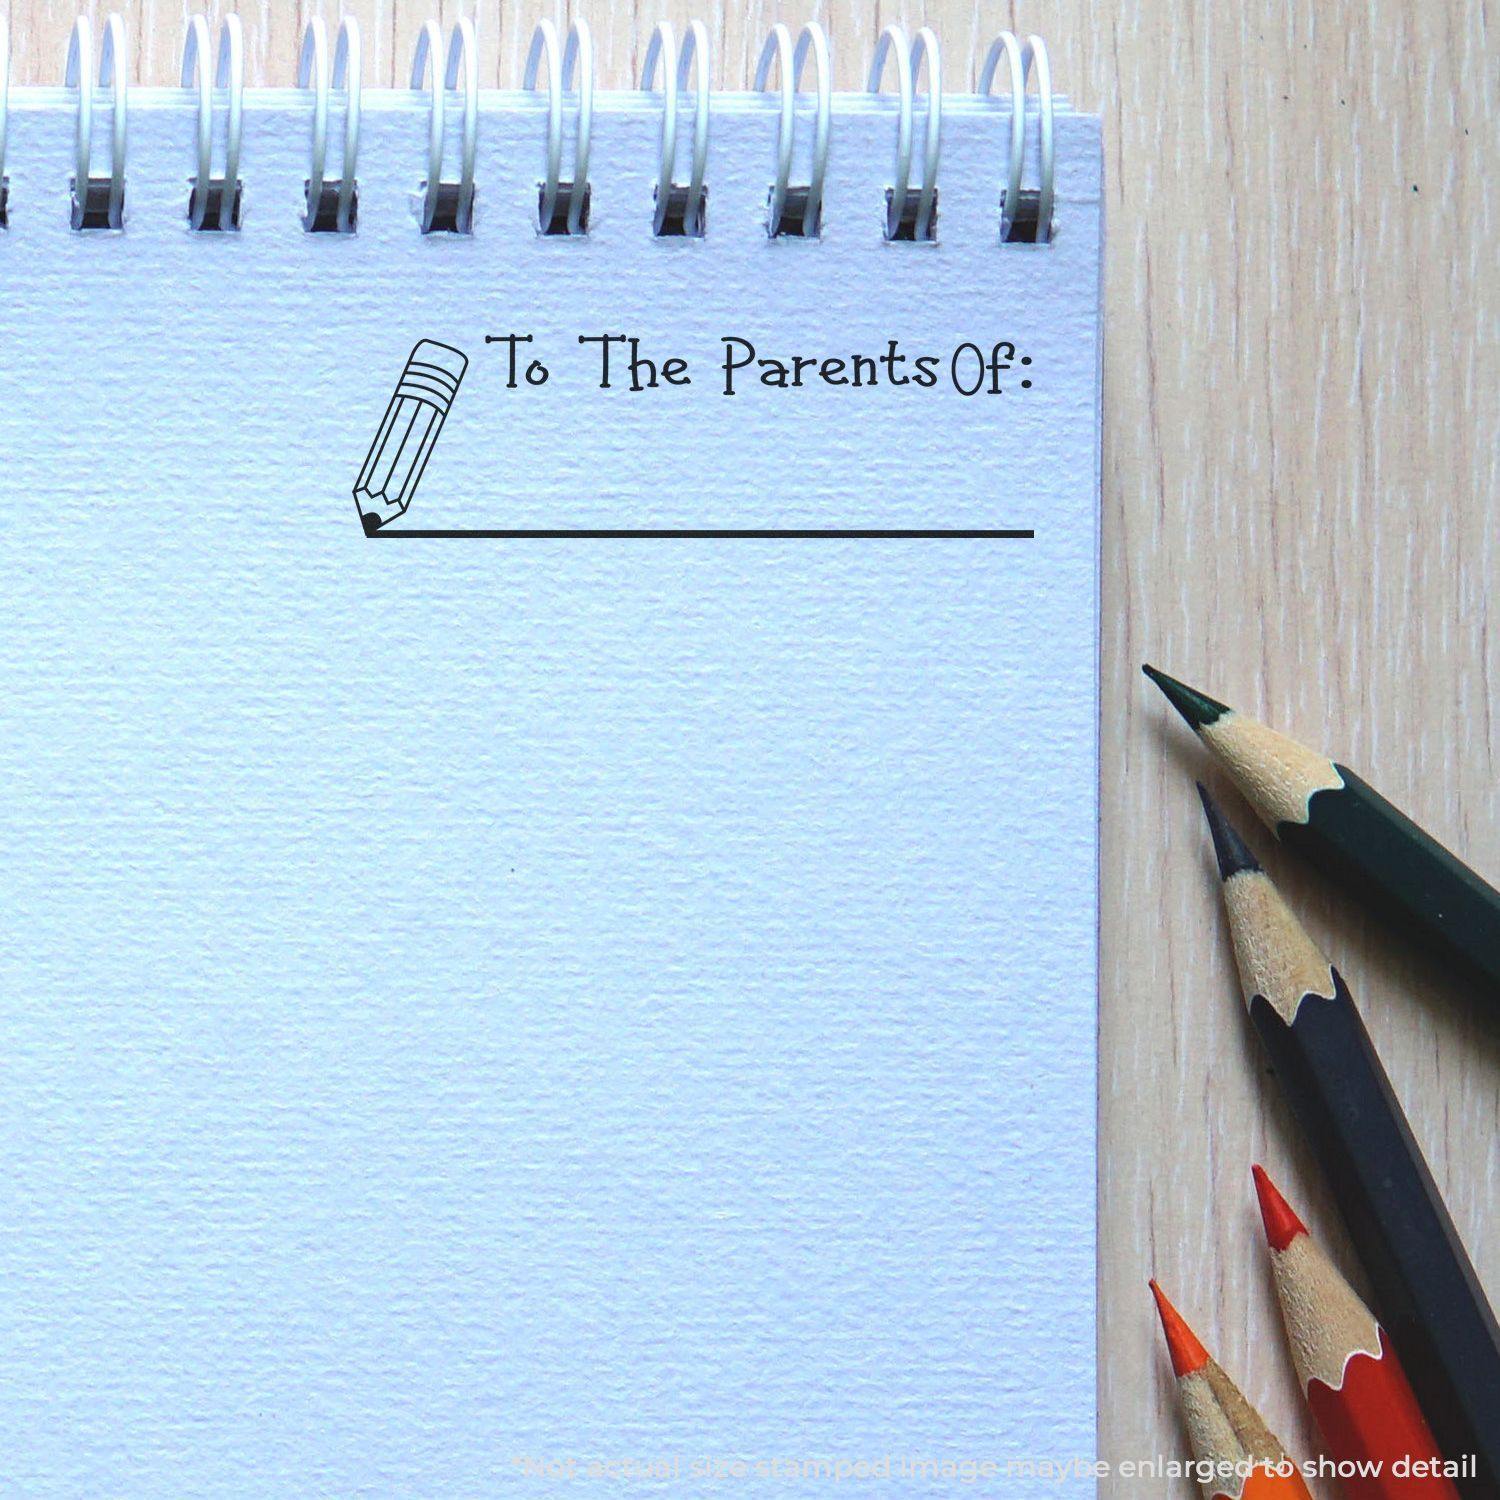 A stock office rubber stamp with a stamped image showing how the text "To The Parents Of:" in a large font with an image of a pencil next to the line is displayed after stamping.